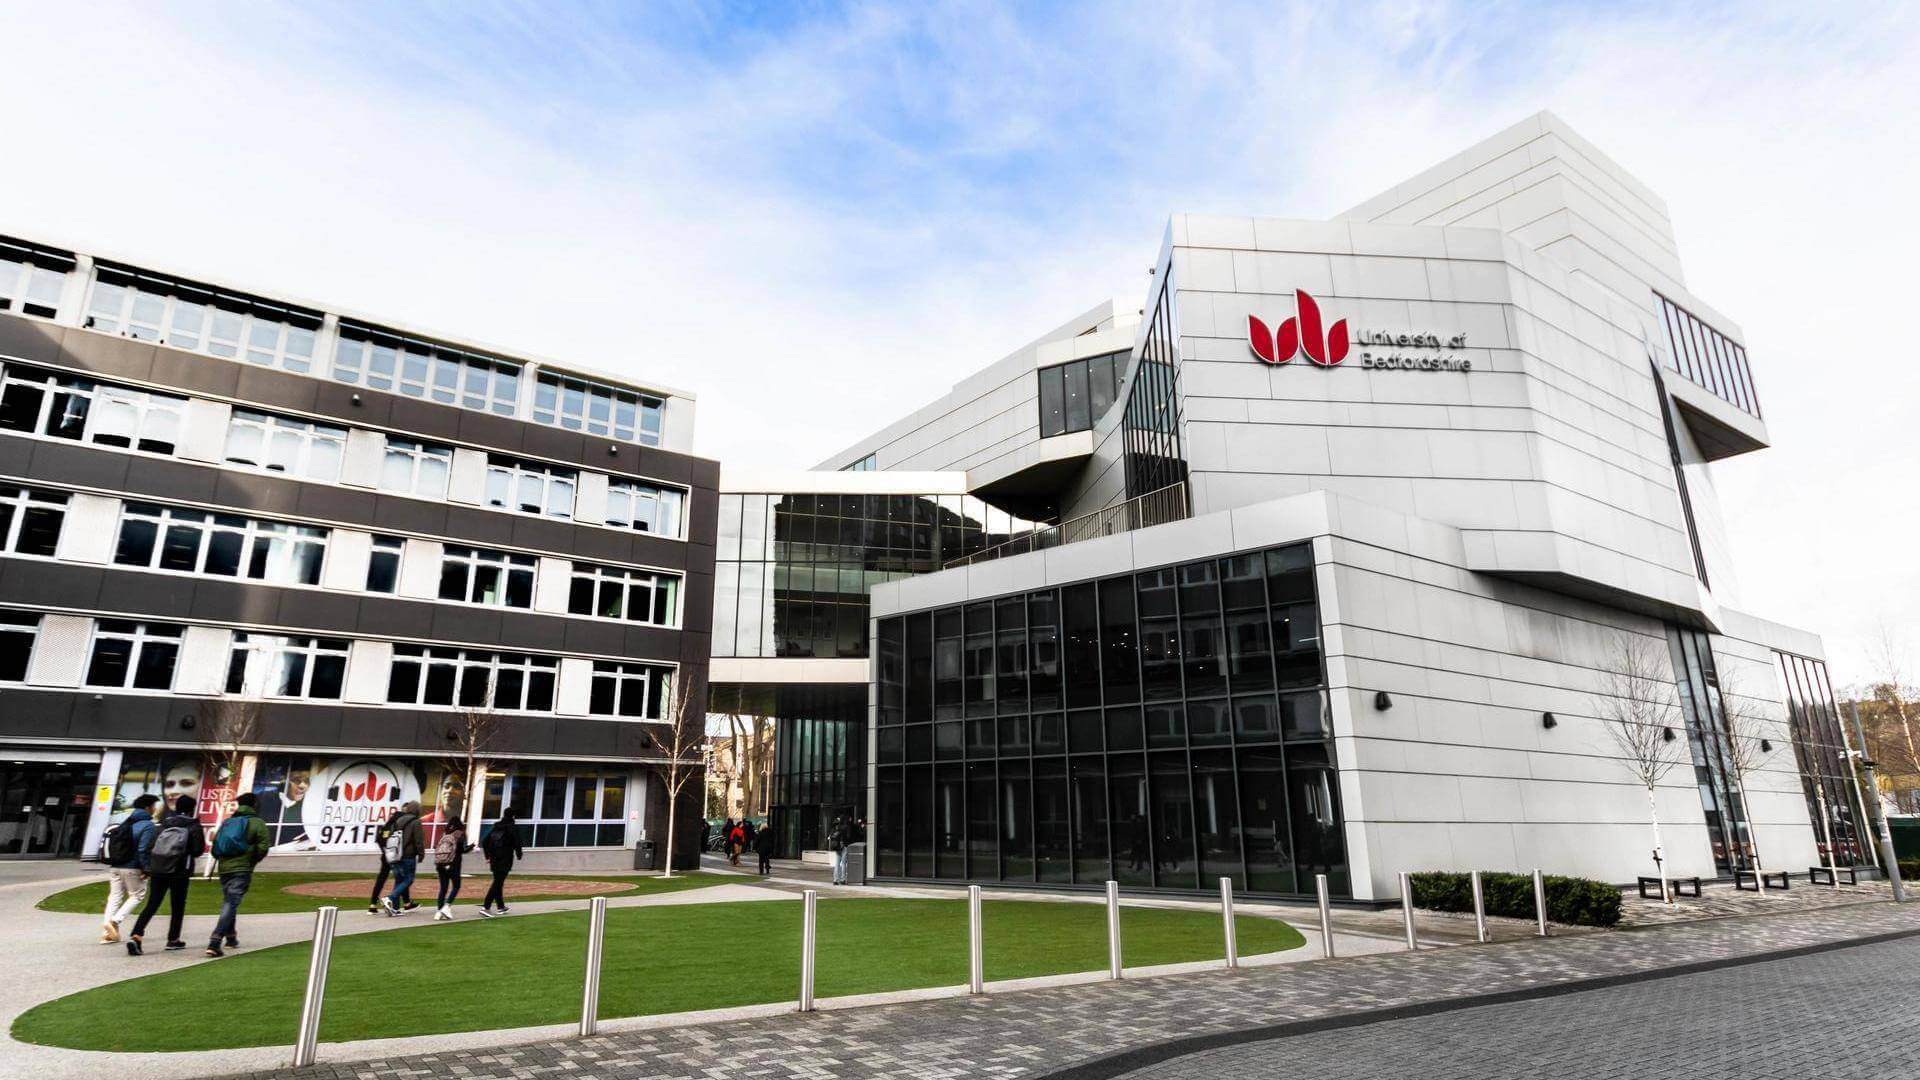 Cover image of University of Bedfordshire